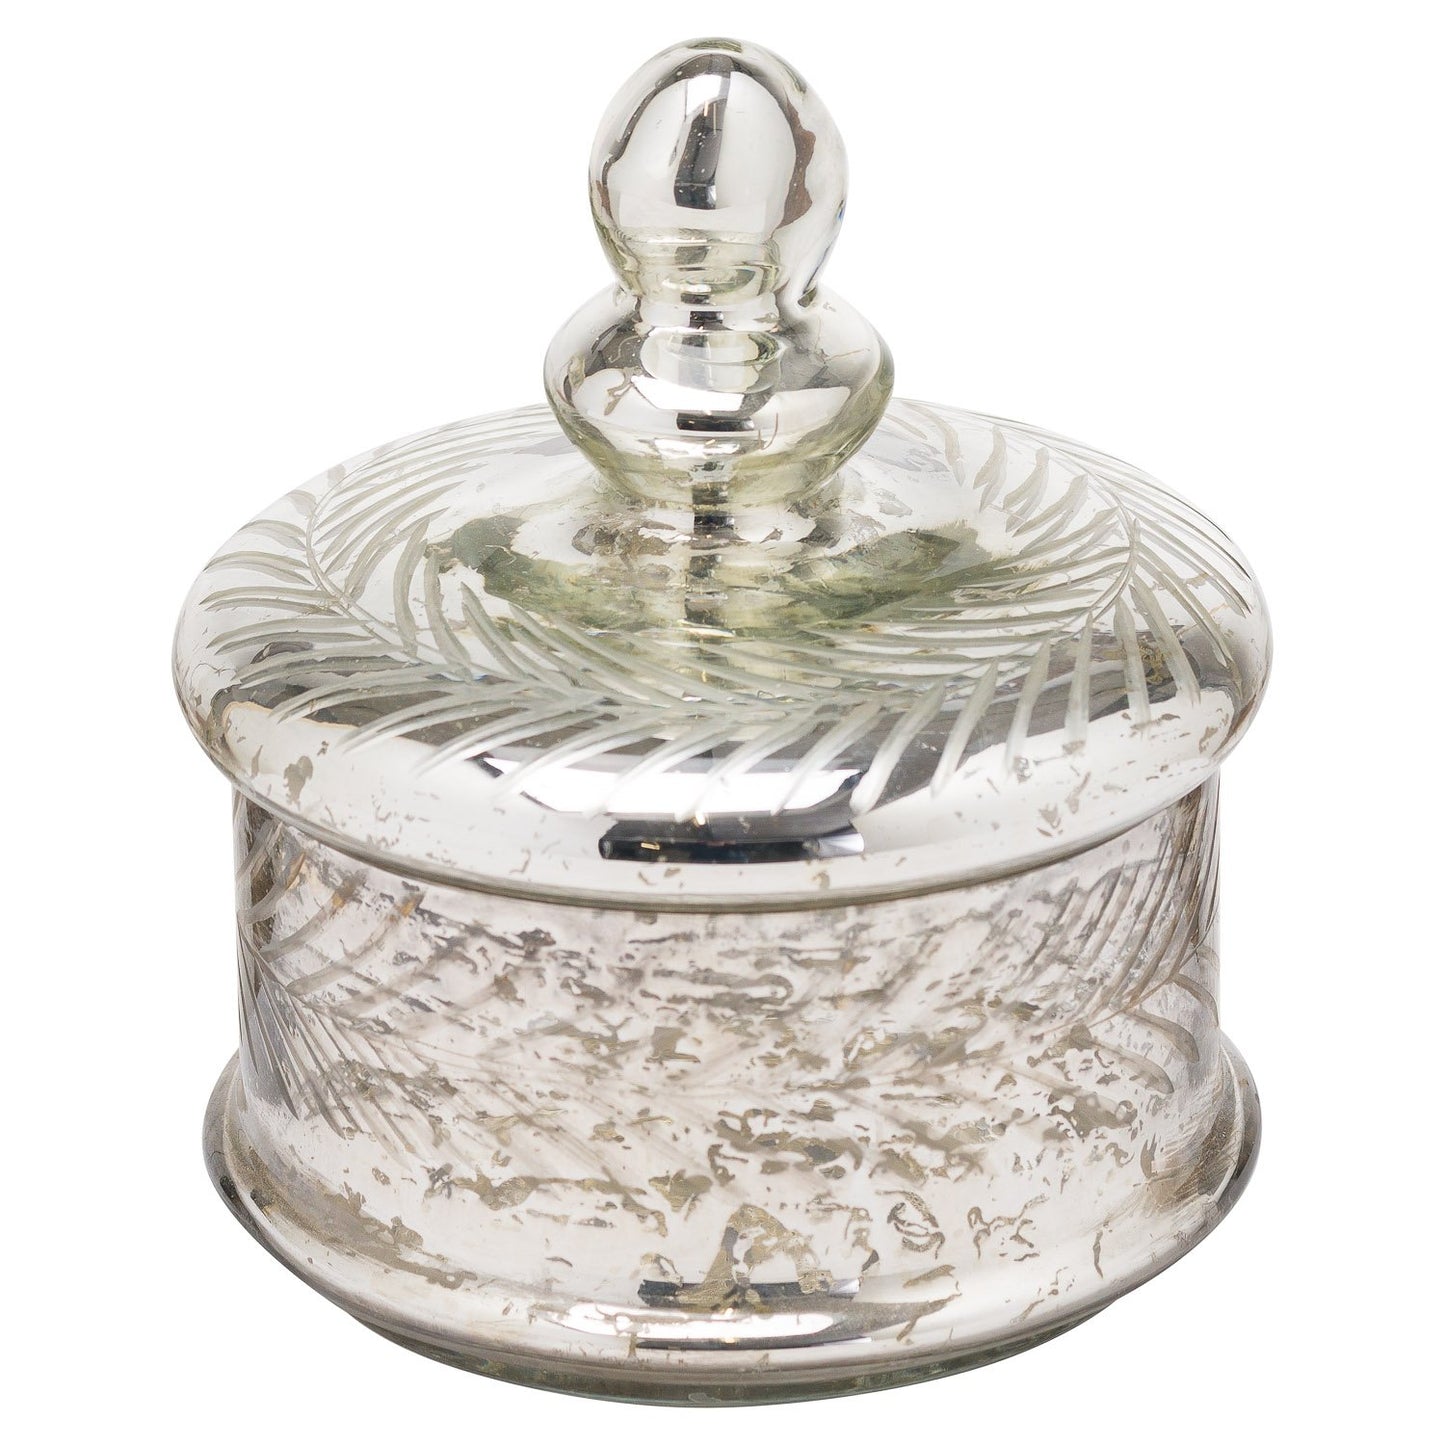 The Noel Collection Silver Foil Effect Small Trinket Jar